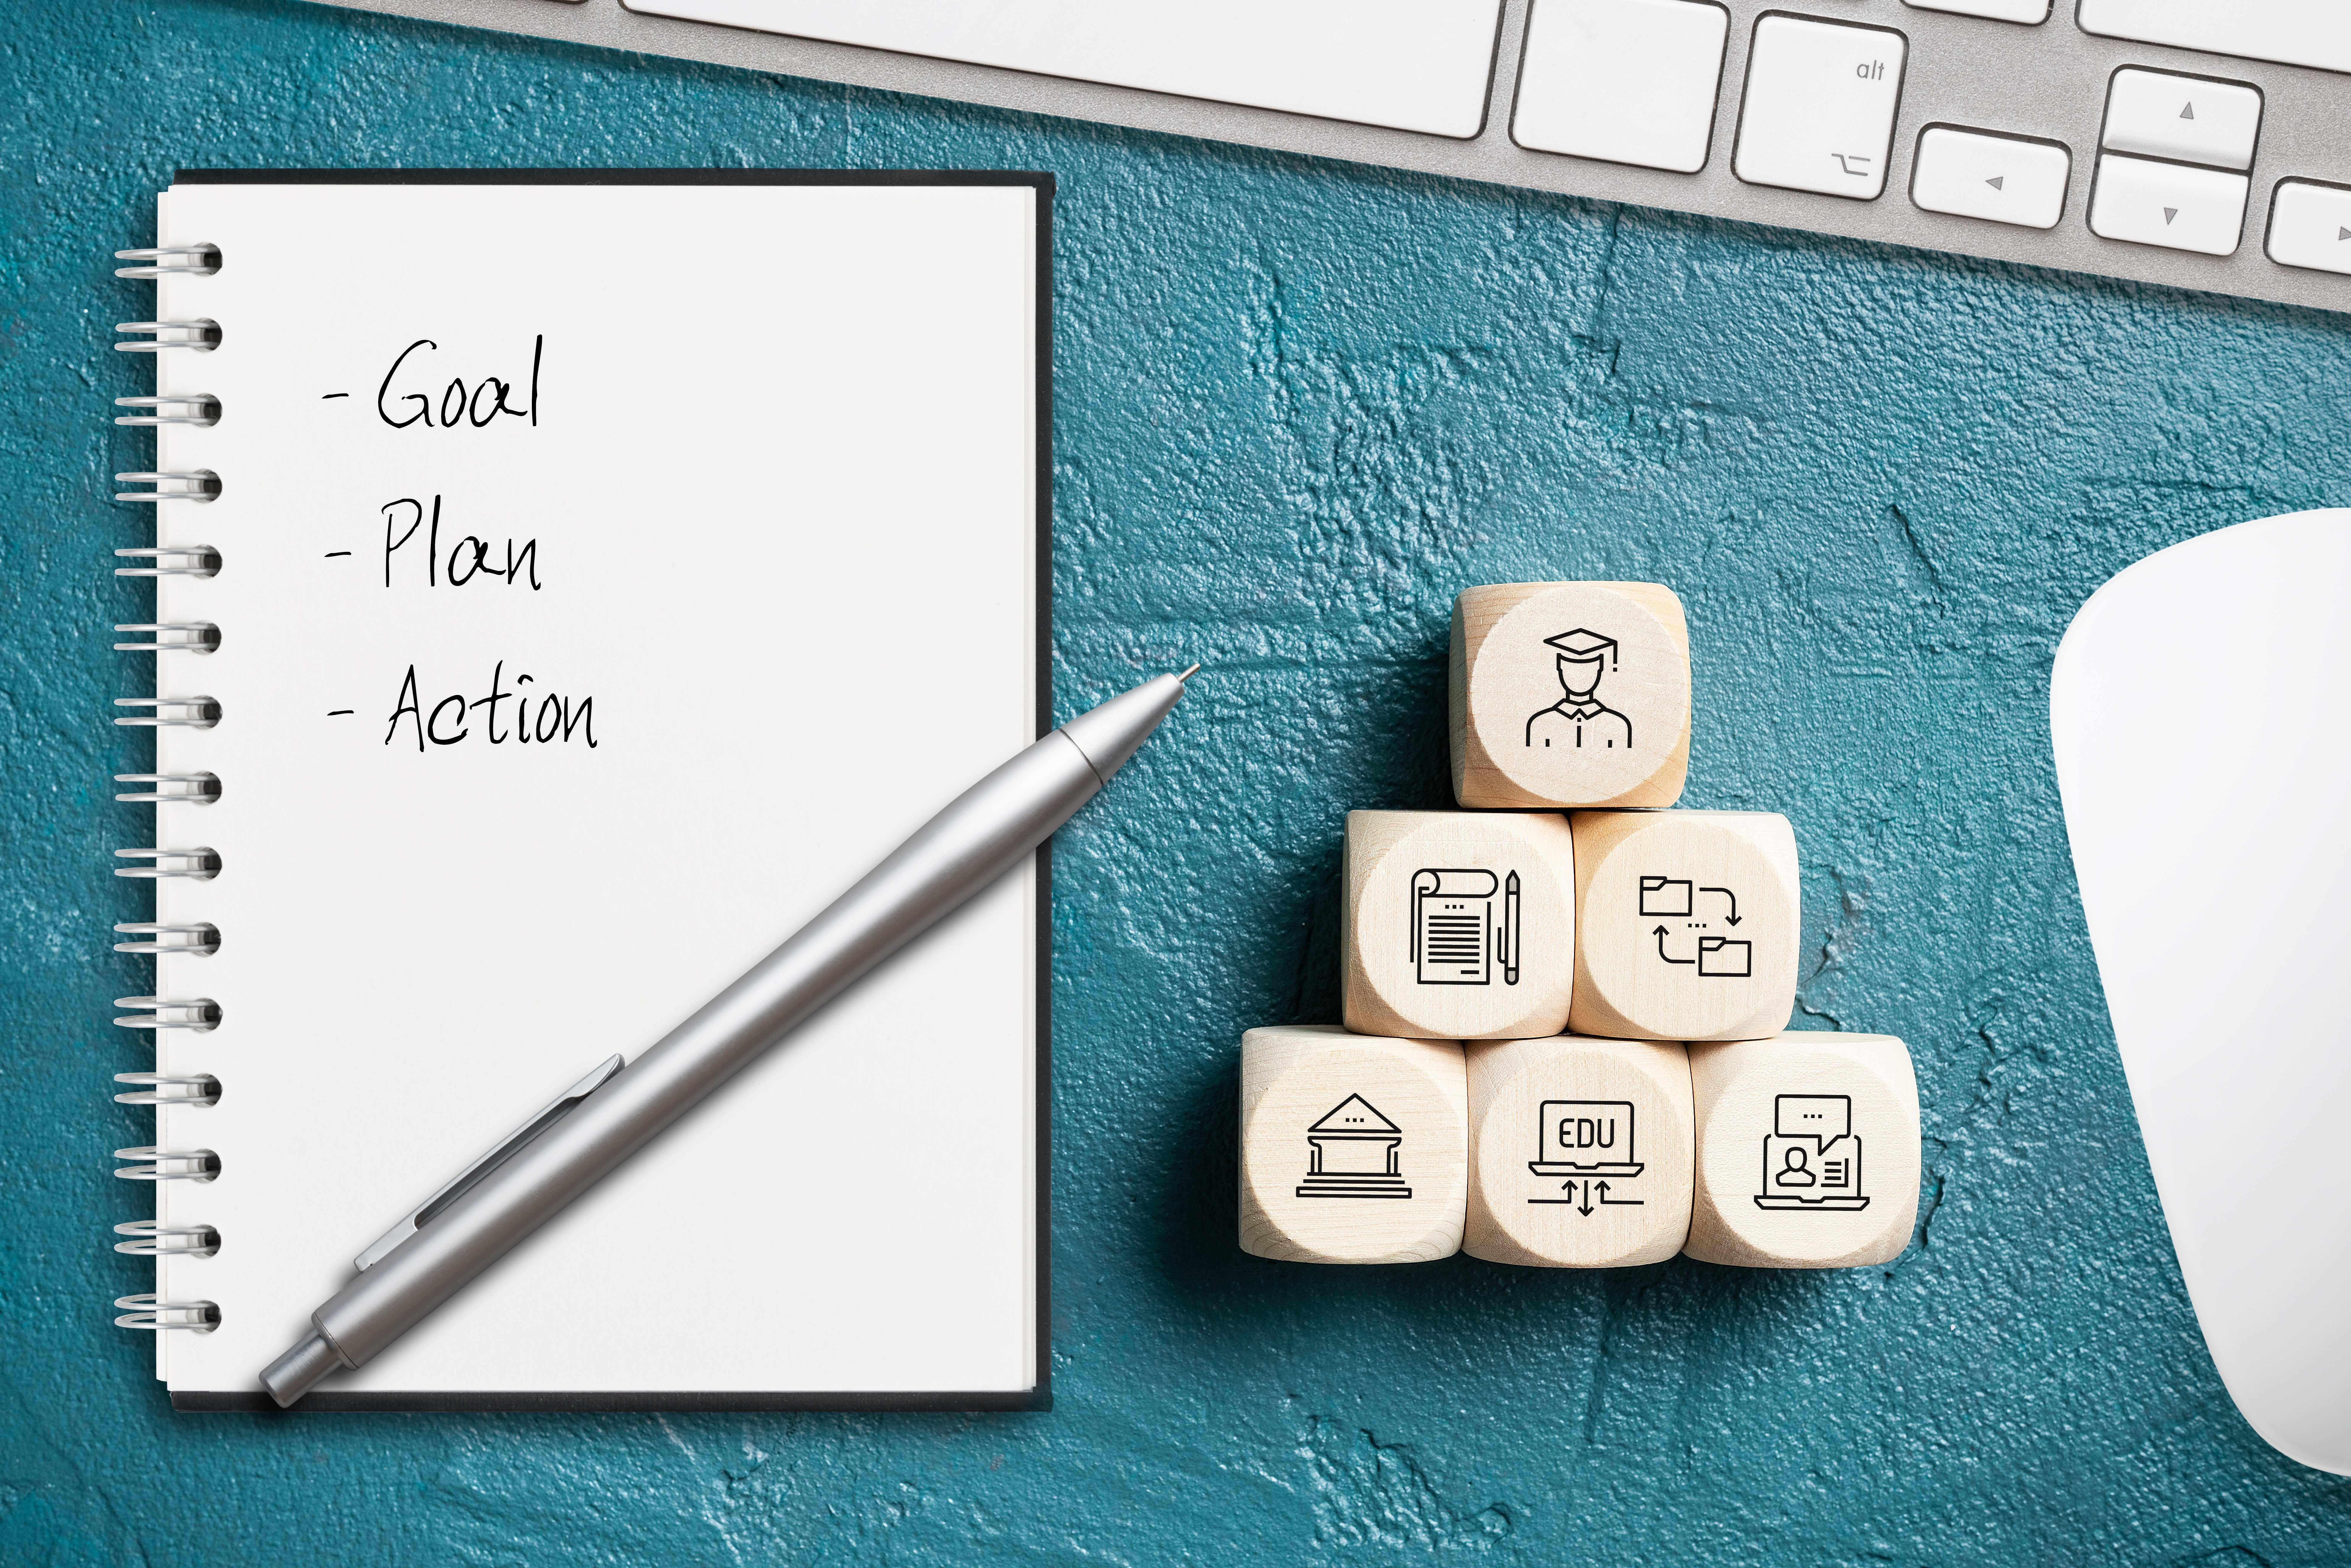 E-Learning concept and notepad with list "goal, plan, action"